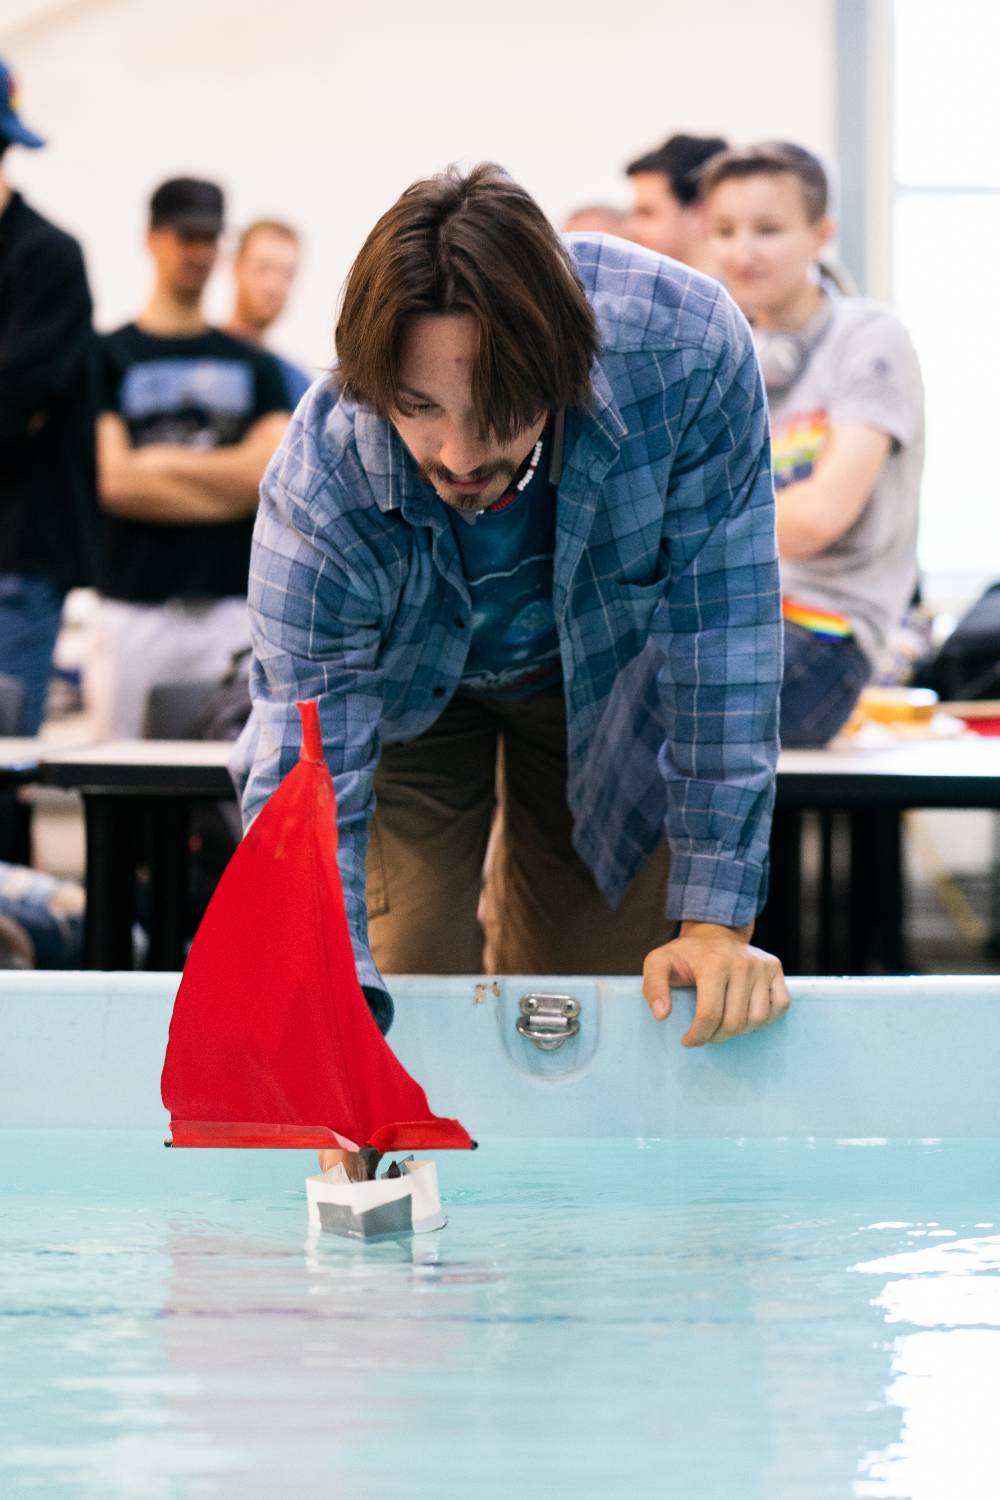 A student launches his boat